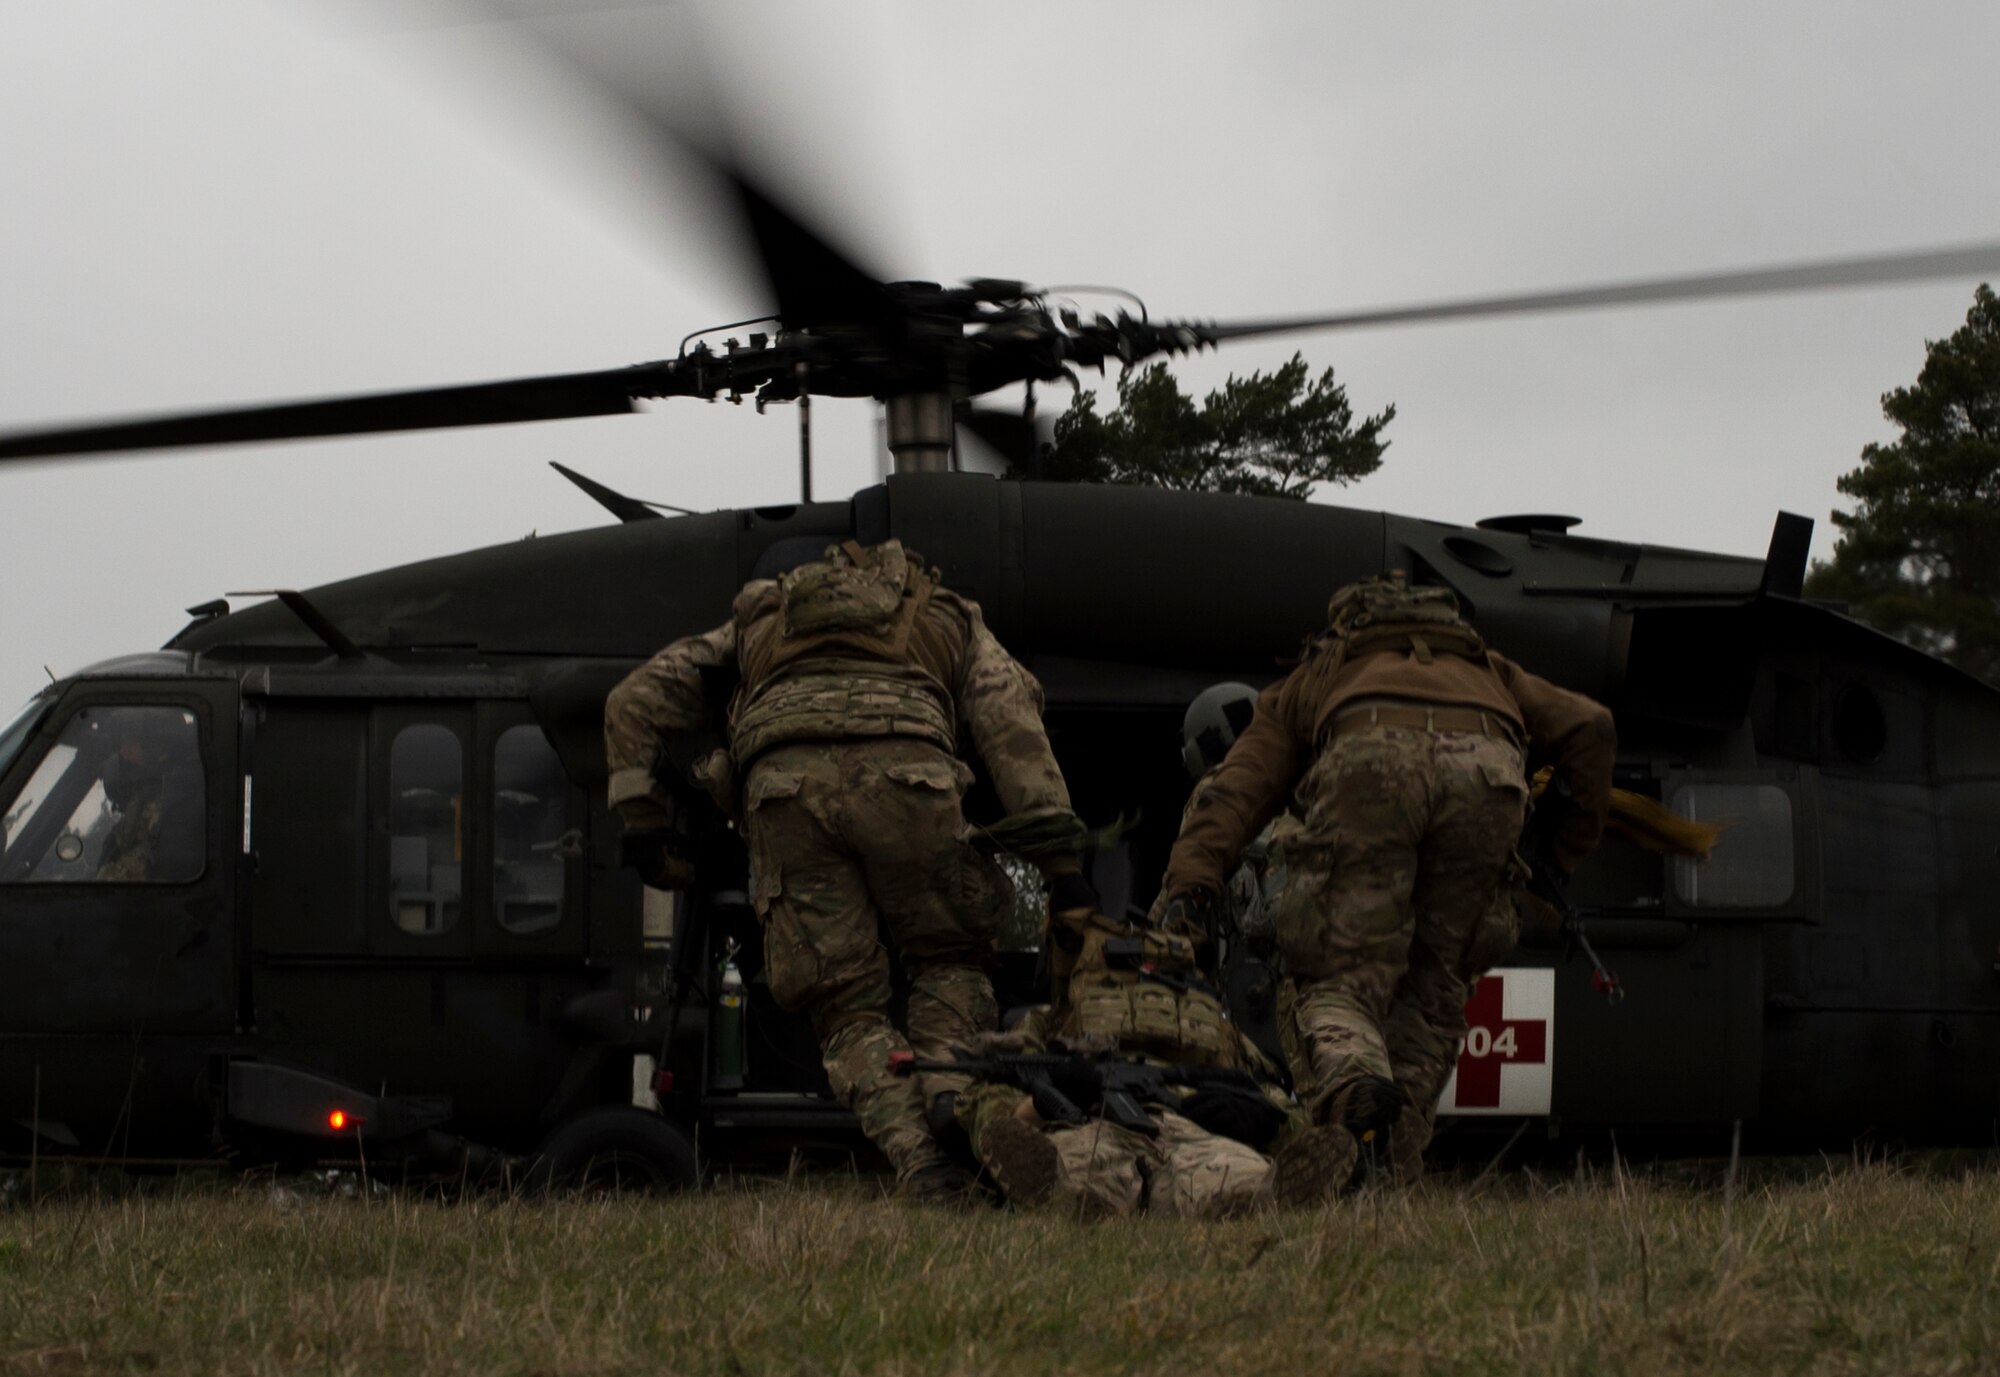 Airmen from the 2nd Air Support Operations Squadron, drag a simulated casualty for medical evacuation during training at U.S. Army Garrison Bavaria in Vilseck, Germany, Feb. 8, 2016. The training consisted of calling in close air support, neutralizing opposing forces and practicing medical evacuation by helicopter. Blank rounds and smoke grenades were used during the training to simulate the potential chaos an ASOS Airman may experience during a real world mission. (U.S. Air Force photo/Senior Airman Jonathan Stefanko)